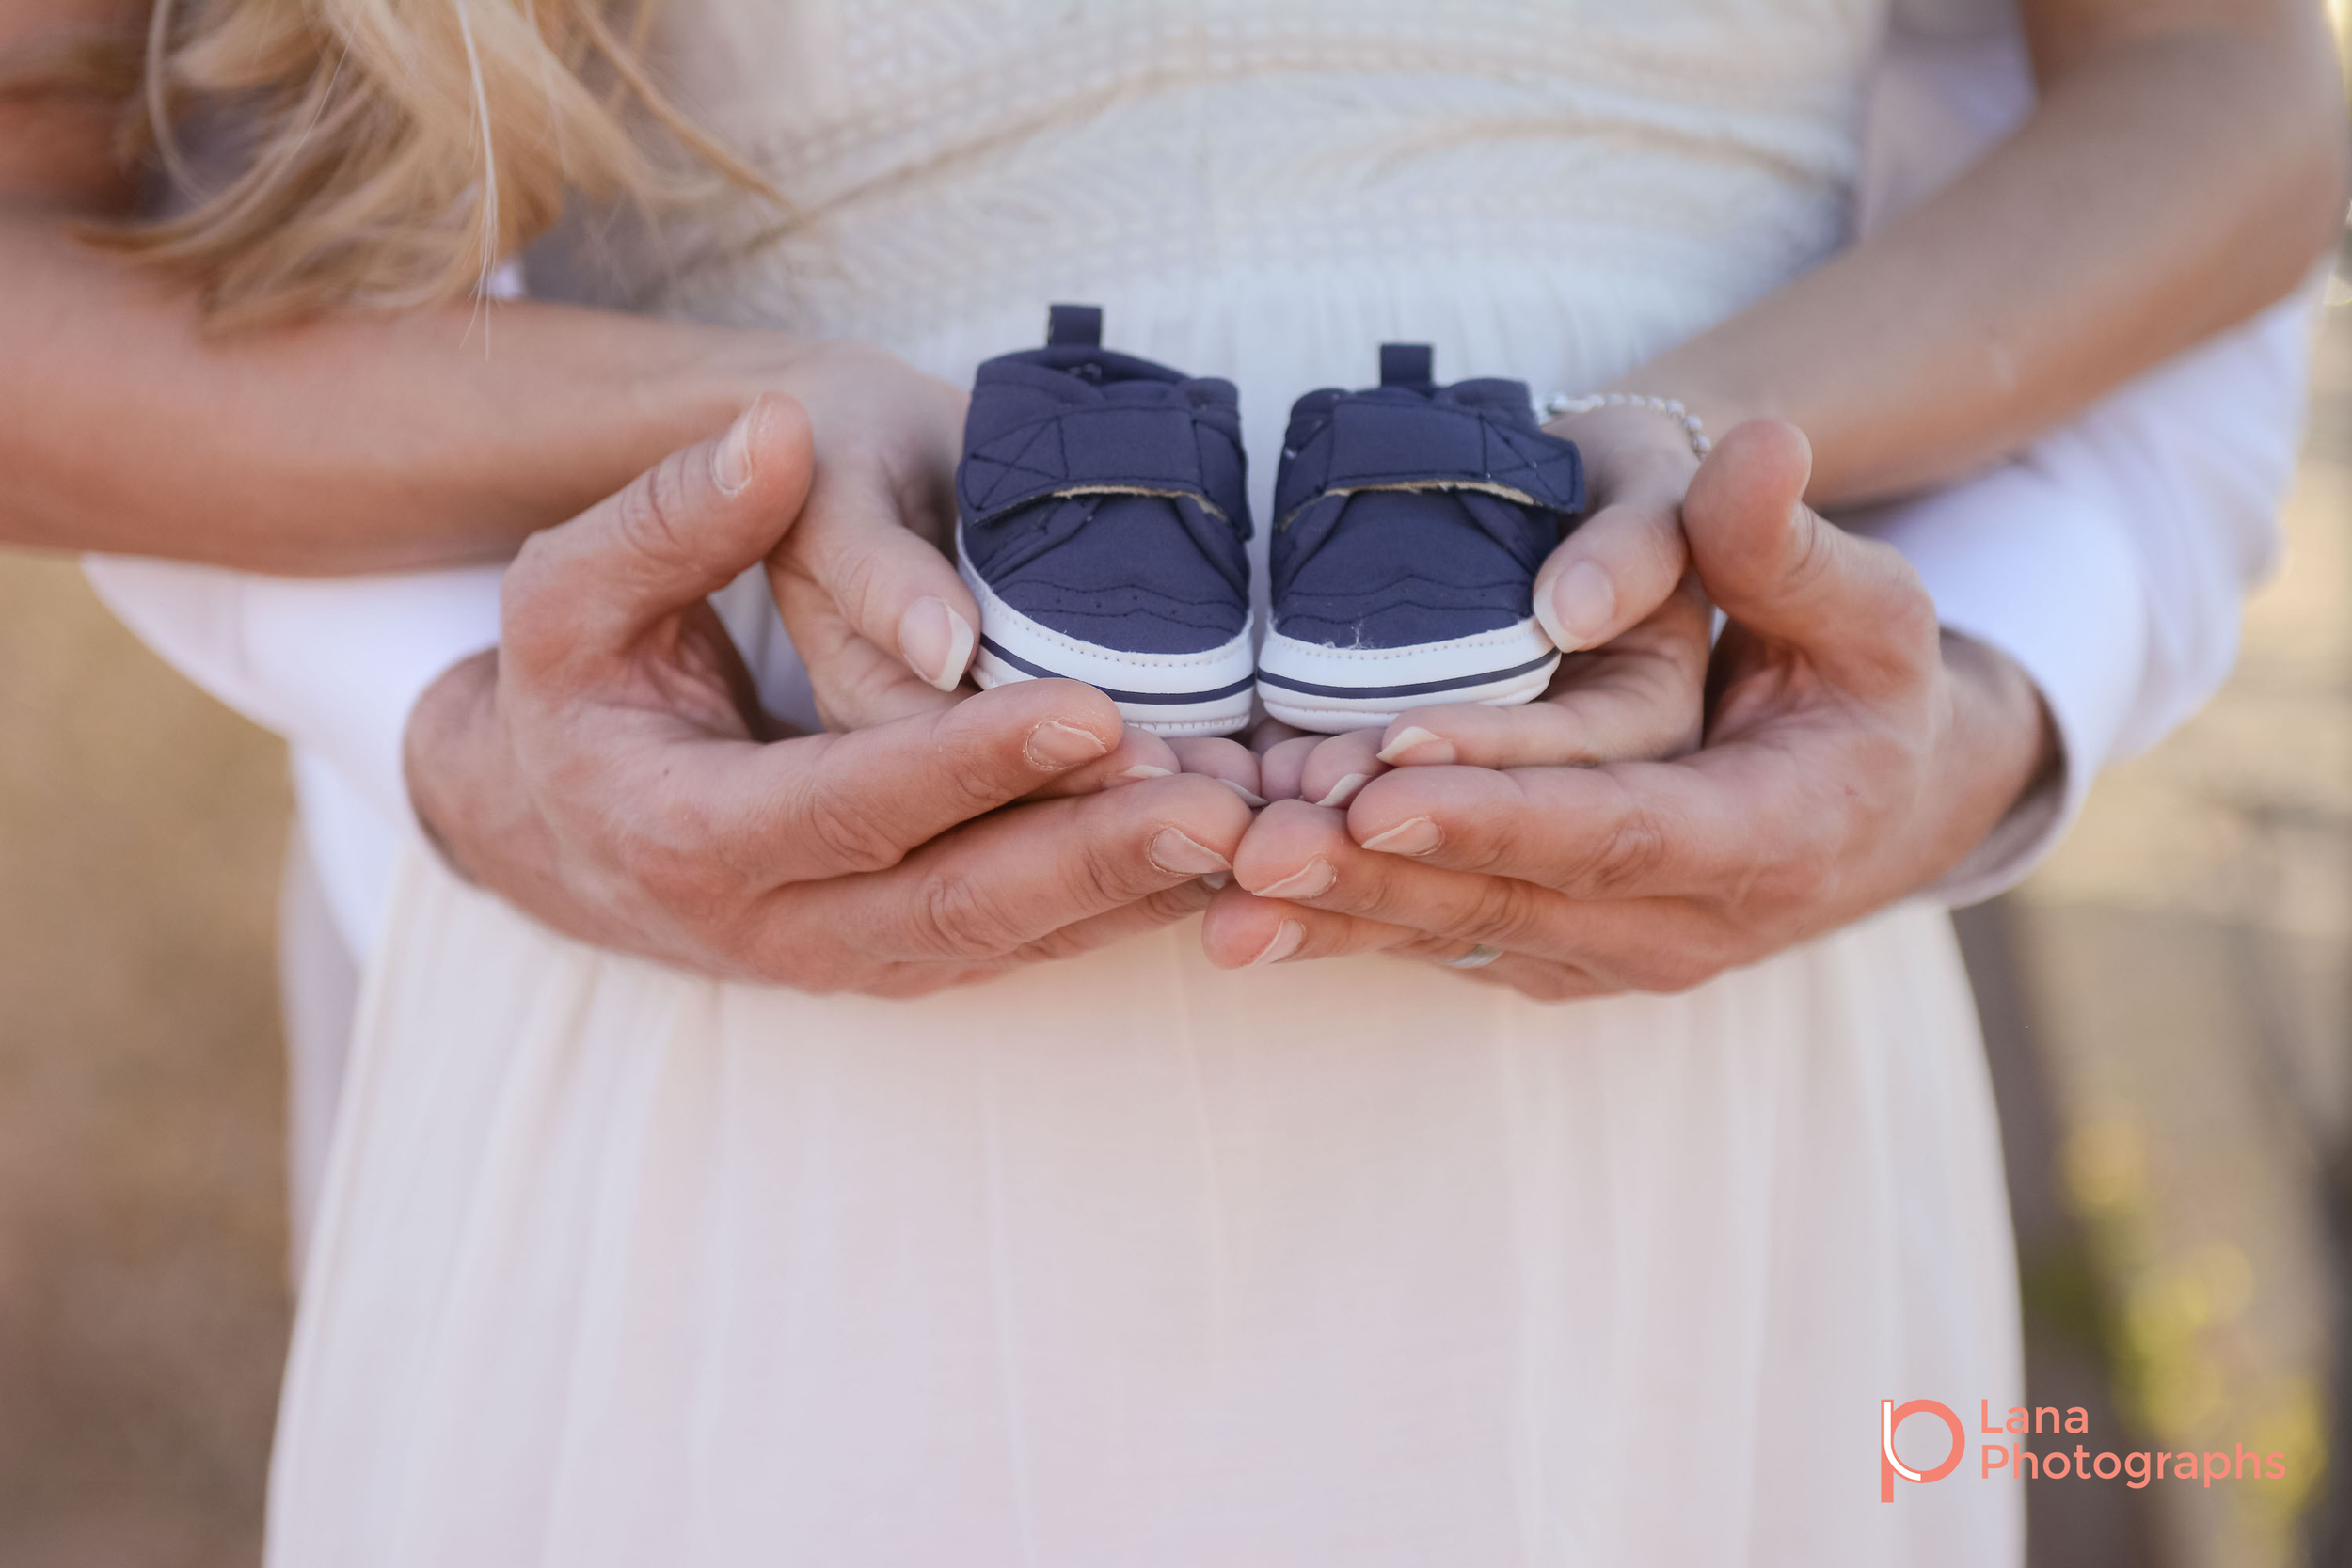 Dubai Maternity Photography portrait of expectant couple posing while holding their future son's shoes in their hands